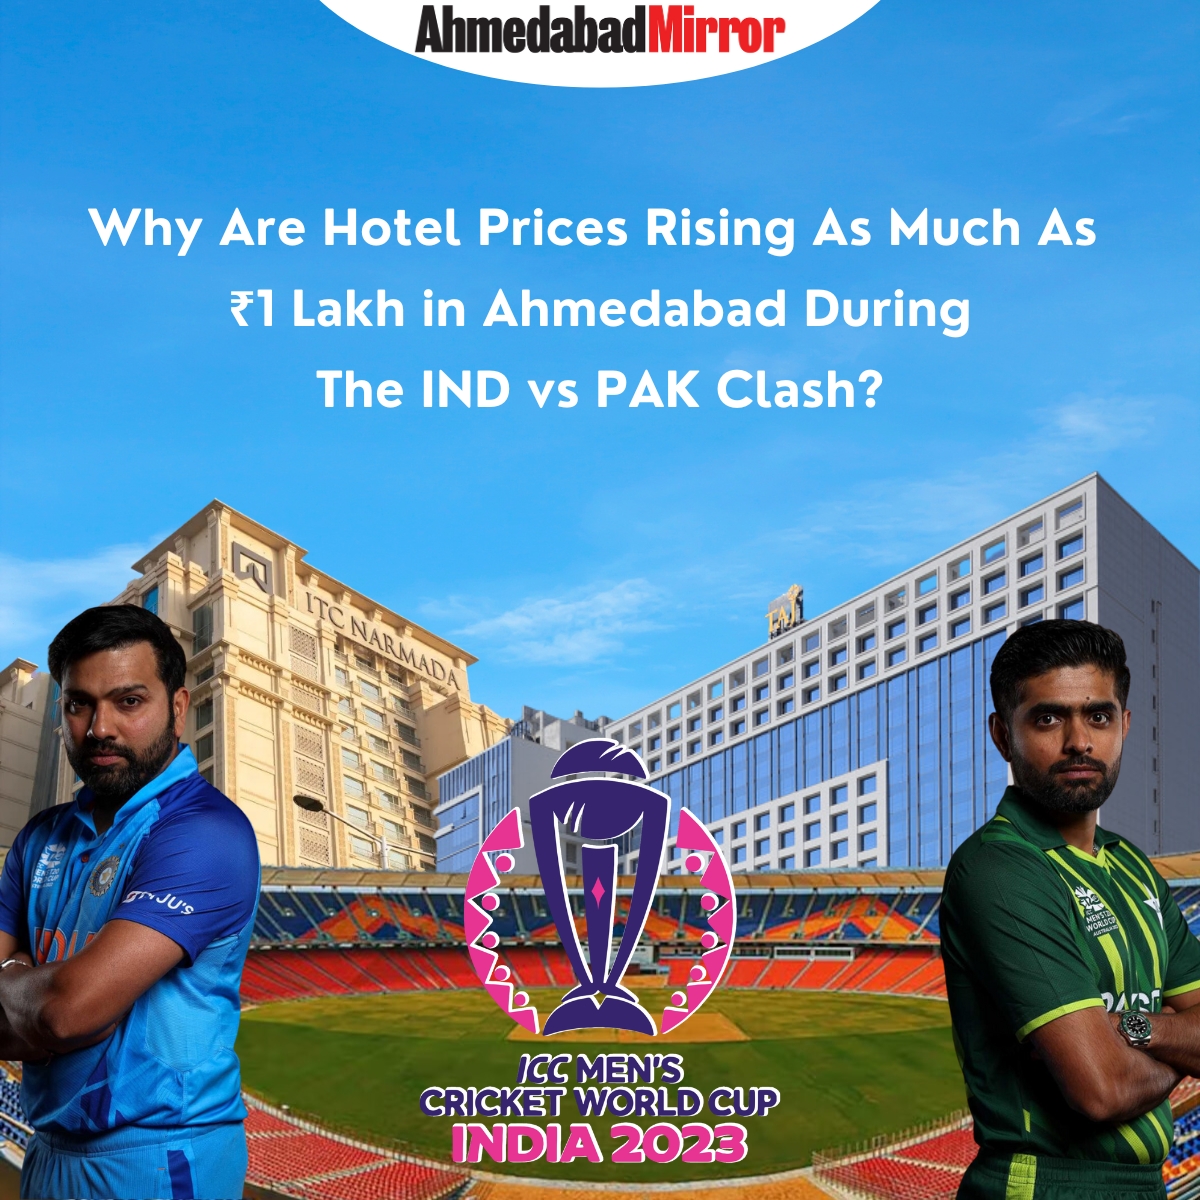 Why Are Hotel Prices Rising As High As ₹1 Lakh in Ahmedabad During The IND vs PAK Clash? #Amdavad #Hotelpricehike #worldcup2023 #cricket #indvspak #ahmedabadmirror